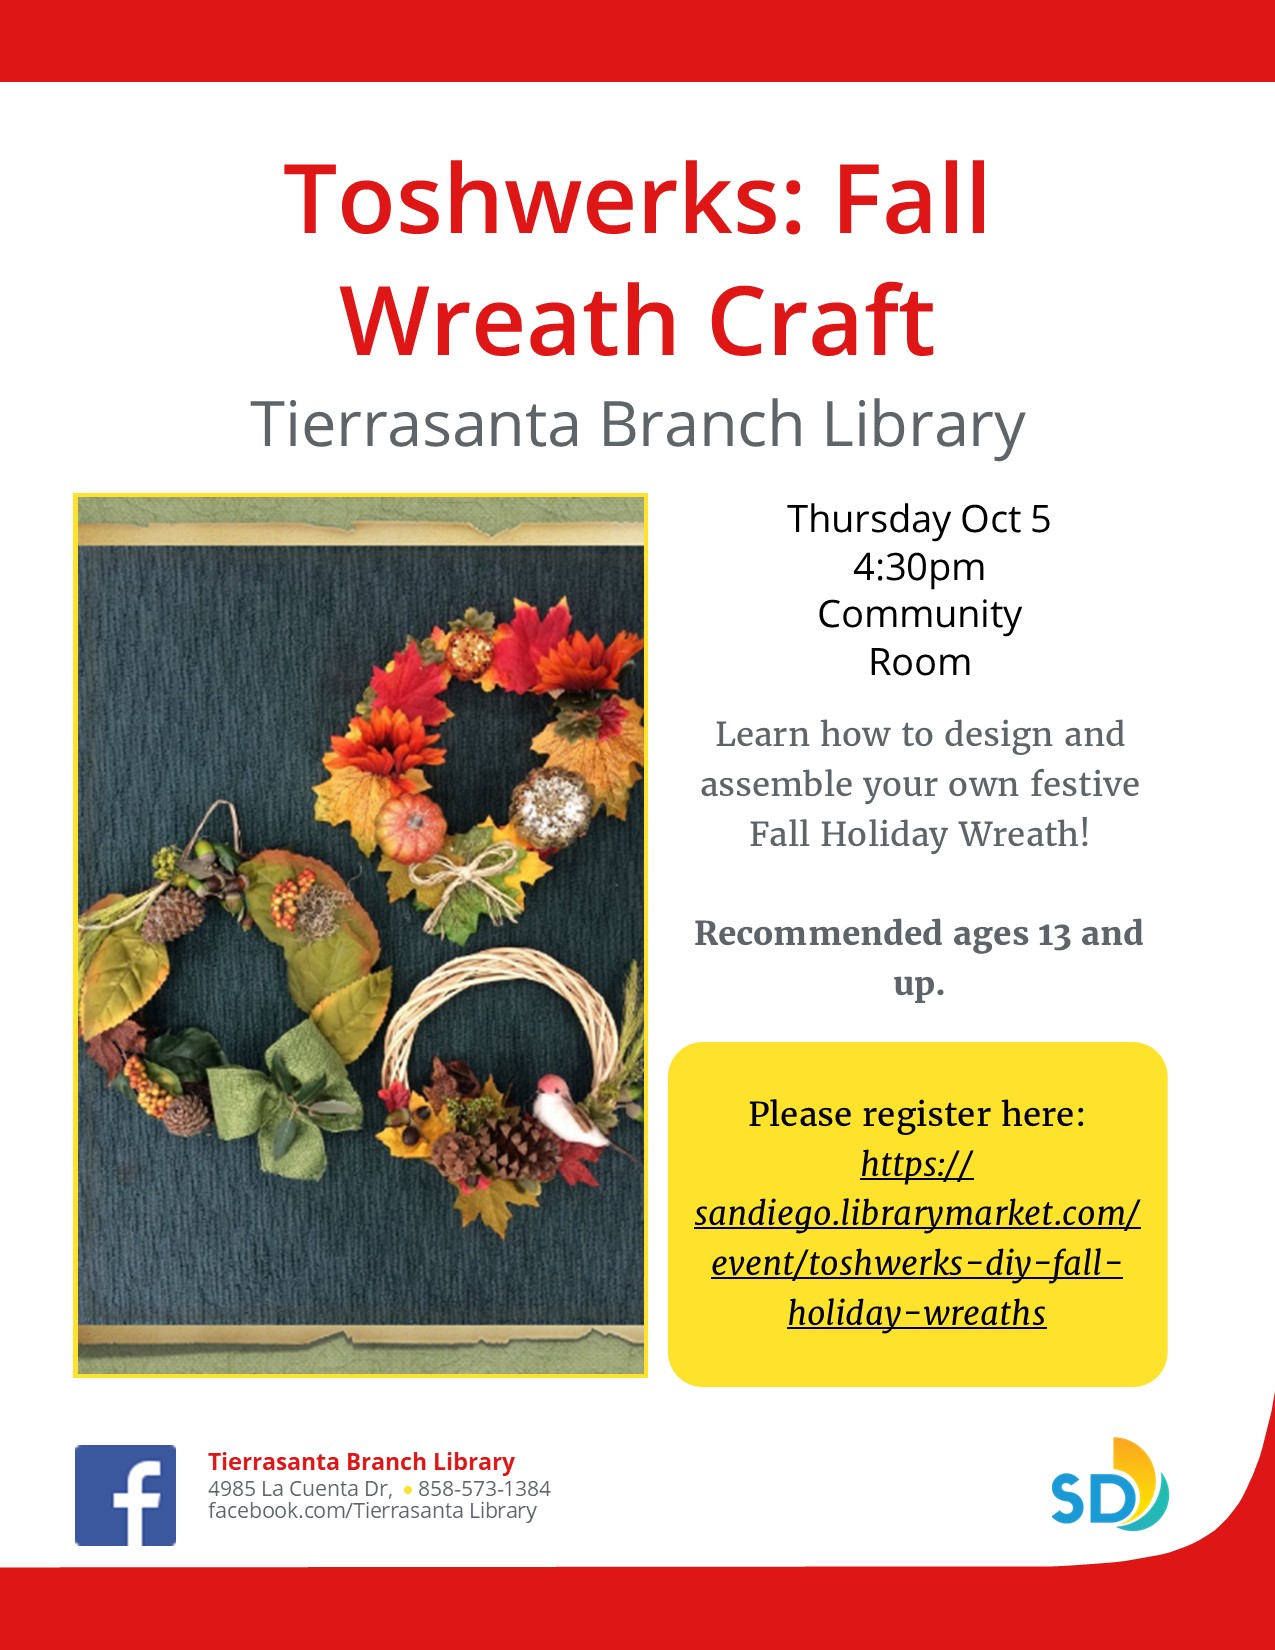 Flyer with image of colorful decorative wreath with lots of reds and yellows